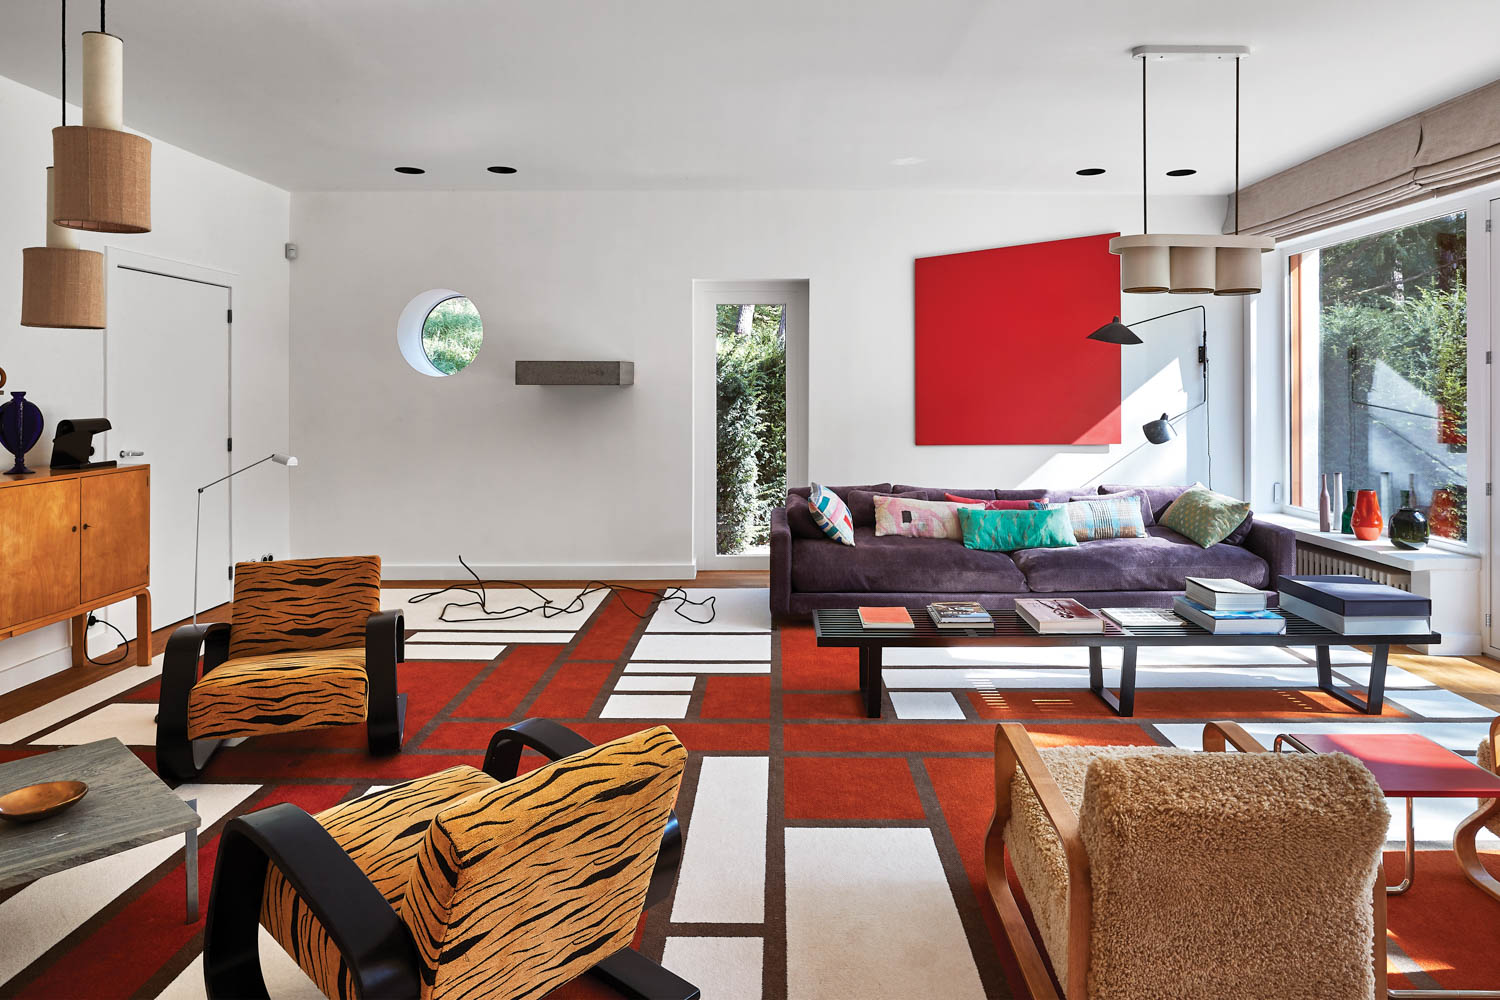 graphic carpets in a living room with a porthole window